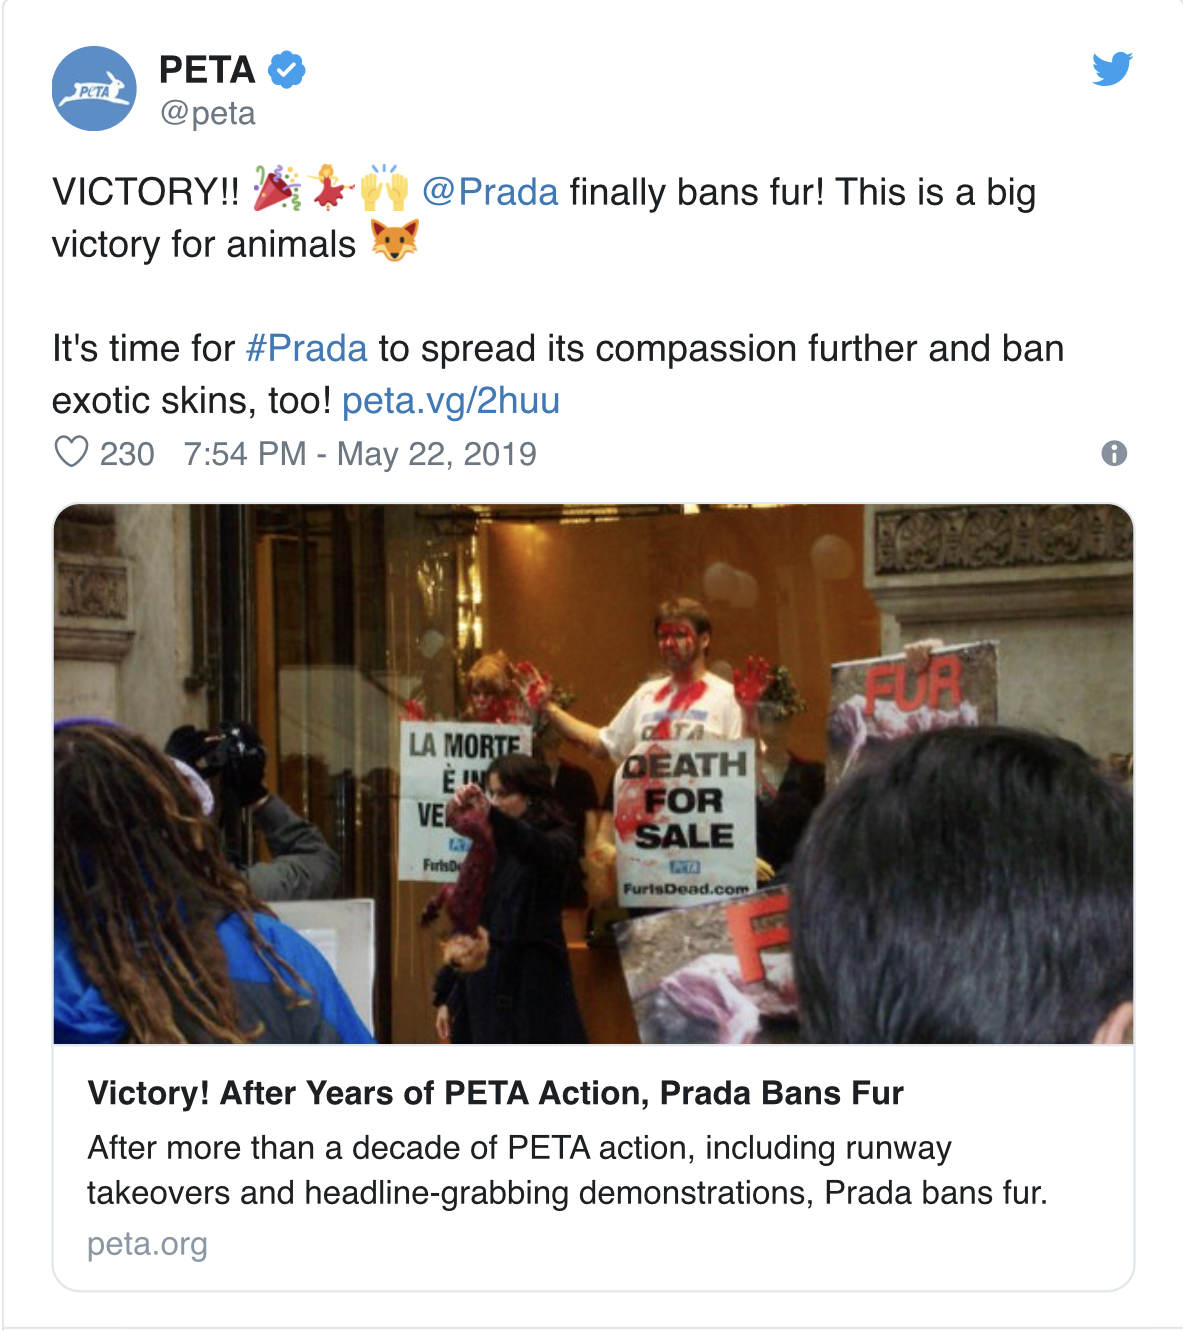 PETA purchased the minimum amount of stock in the company required to propose shareholder resolutions to ban exotic skins. Most shoppers no longer wish to wear the skin of any animal who was electrocuted or bludgeoned to death.